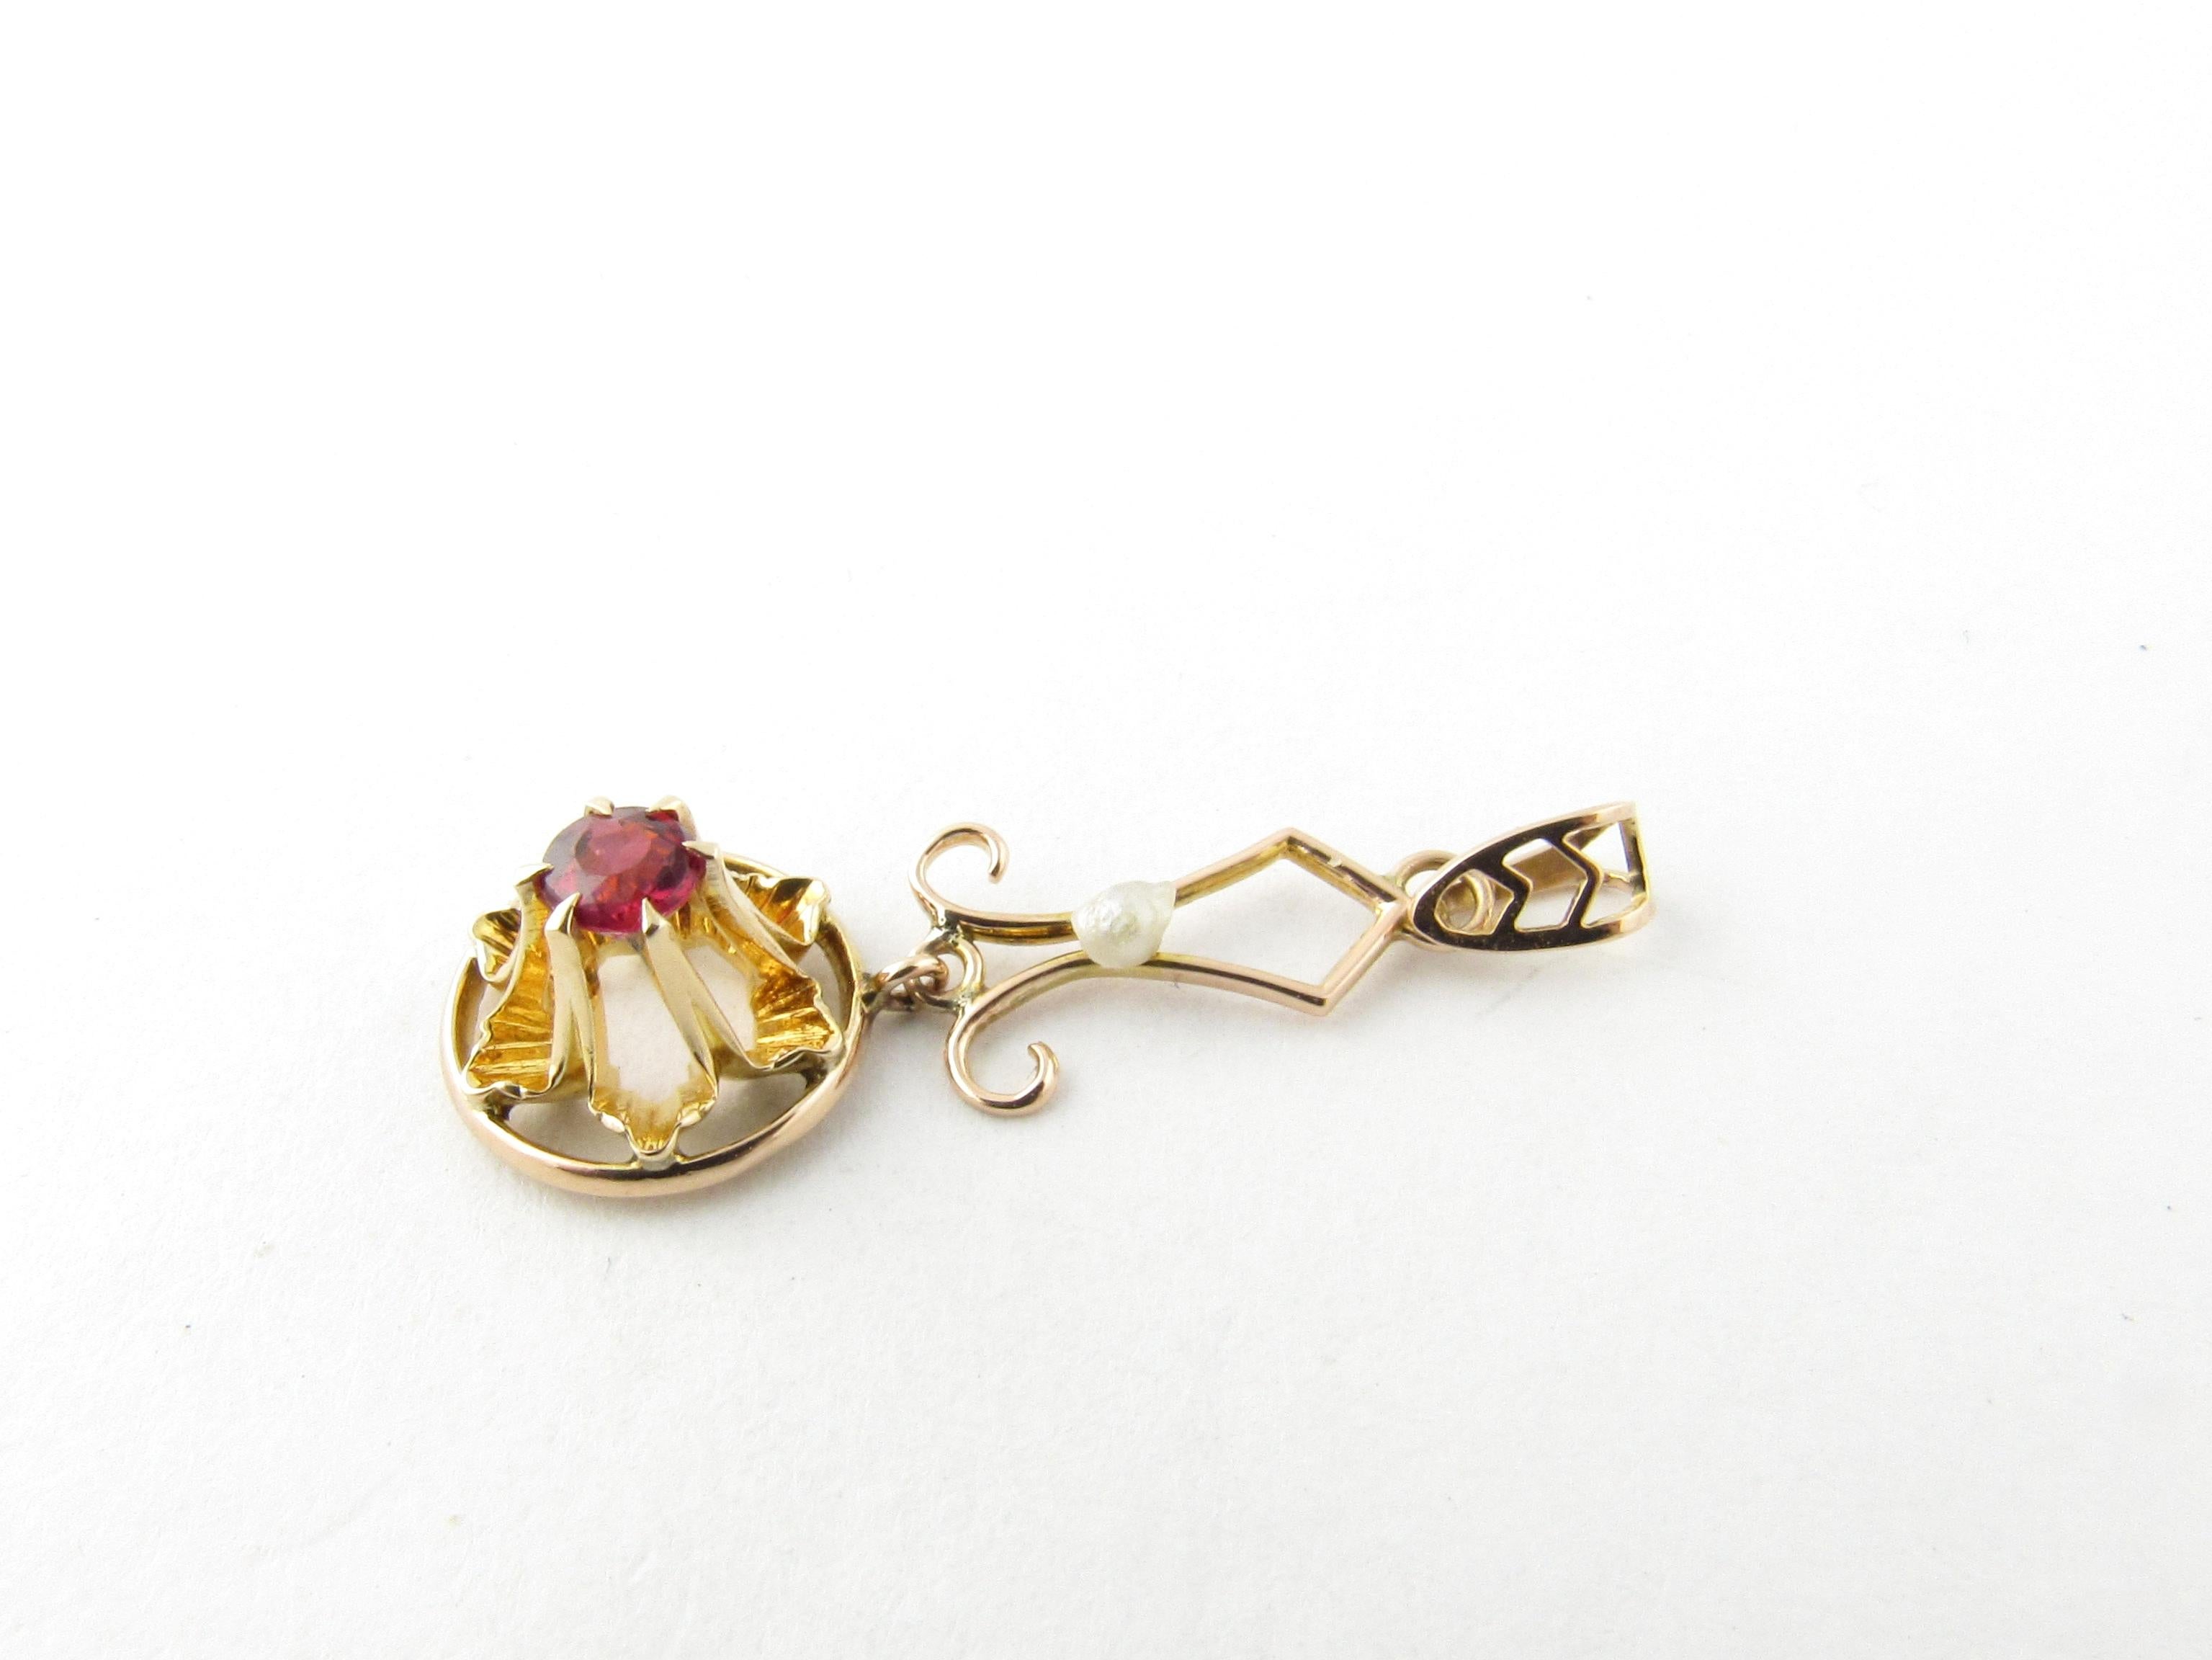 This lovely pendant features one round synthetic ruby (5 mm) accented with one seed pearl and set in beautifully detailed 10K yellow gold.

Size:  22 mm x  10 mm (actual pendant)

Weight:  0.5 dwt. /  0.9 gr.

Hallmark: 10K

Very good condition,